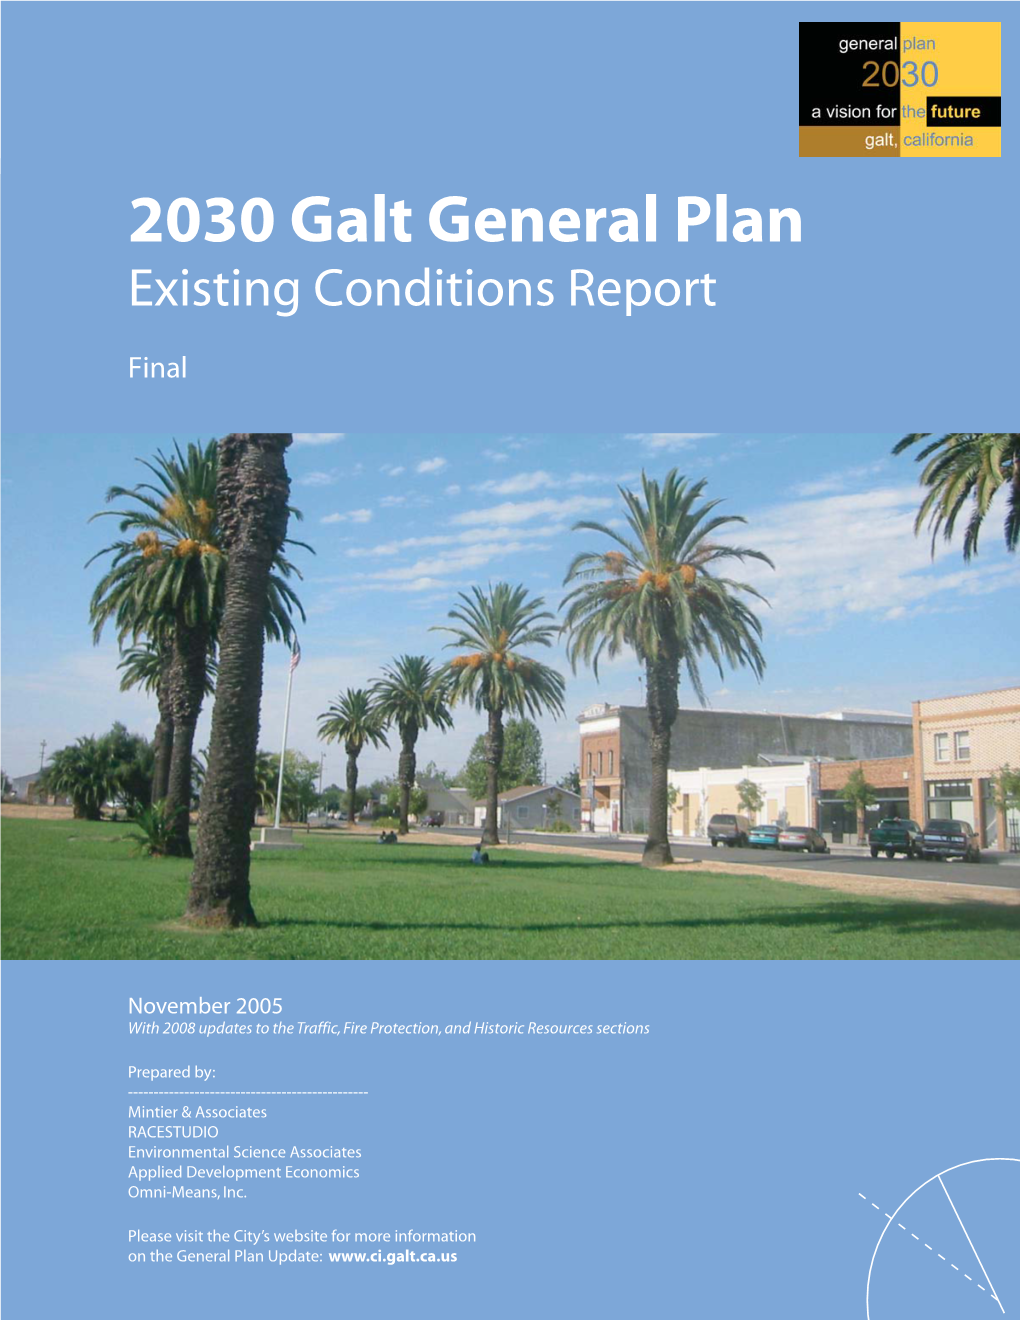 2030 Galt General Plan Existing Conditions Report